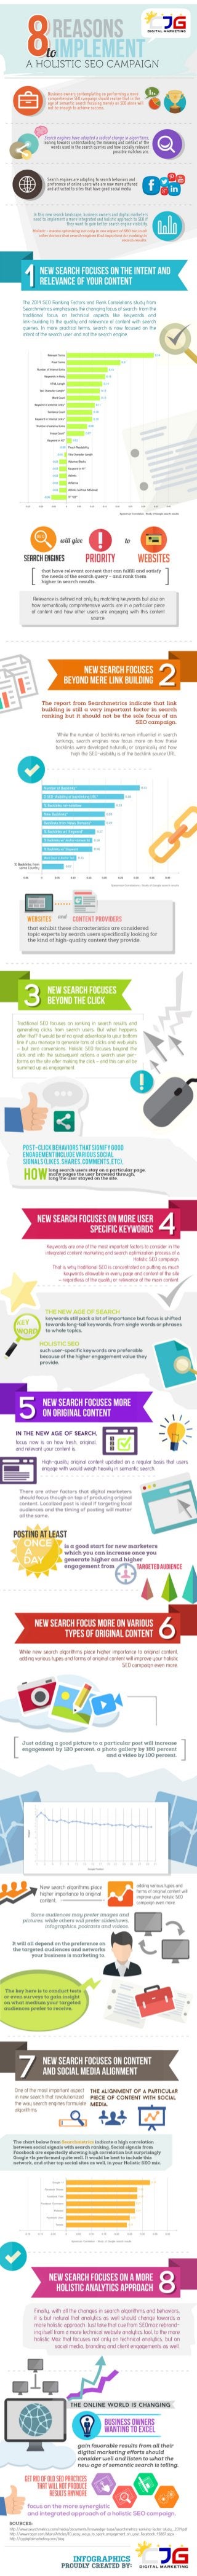 8 Reasons to Implement a Holistic SEO Campaign (Infographic)